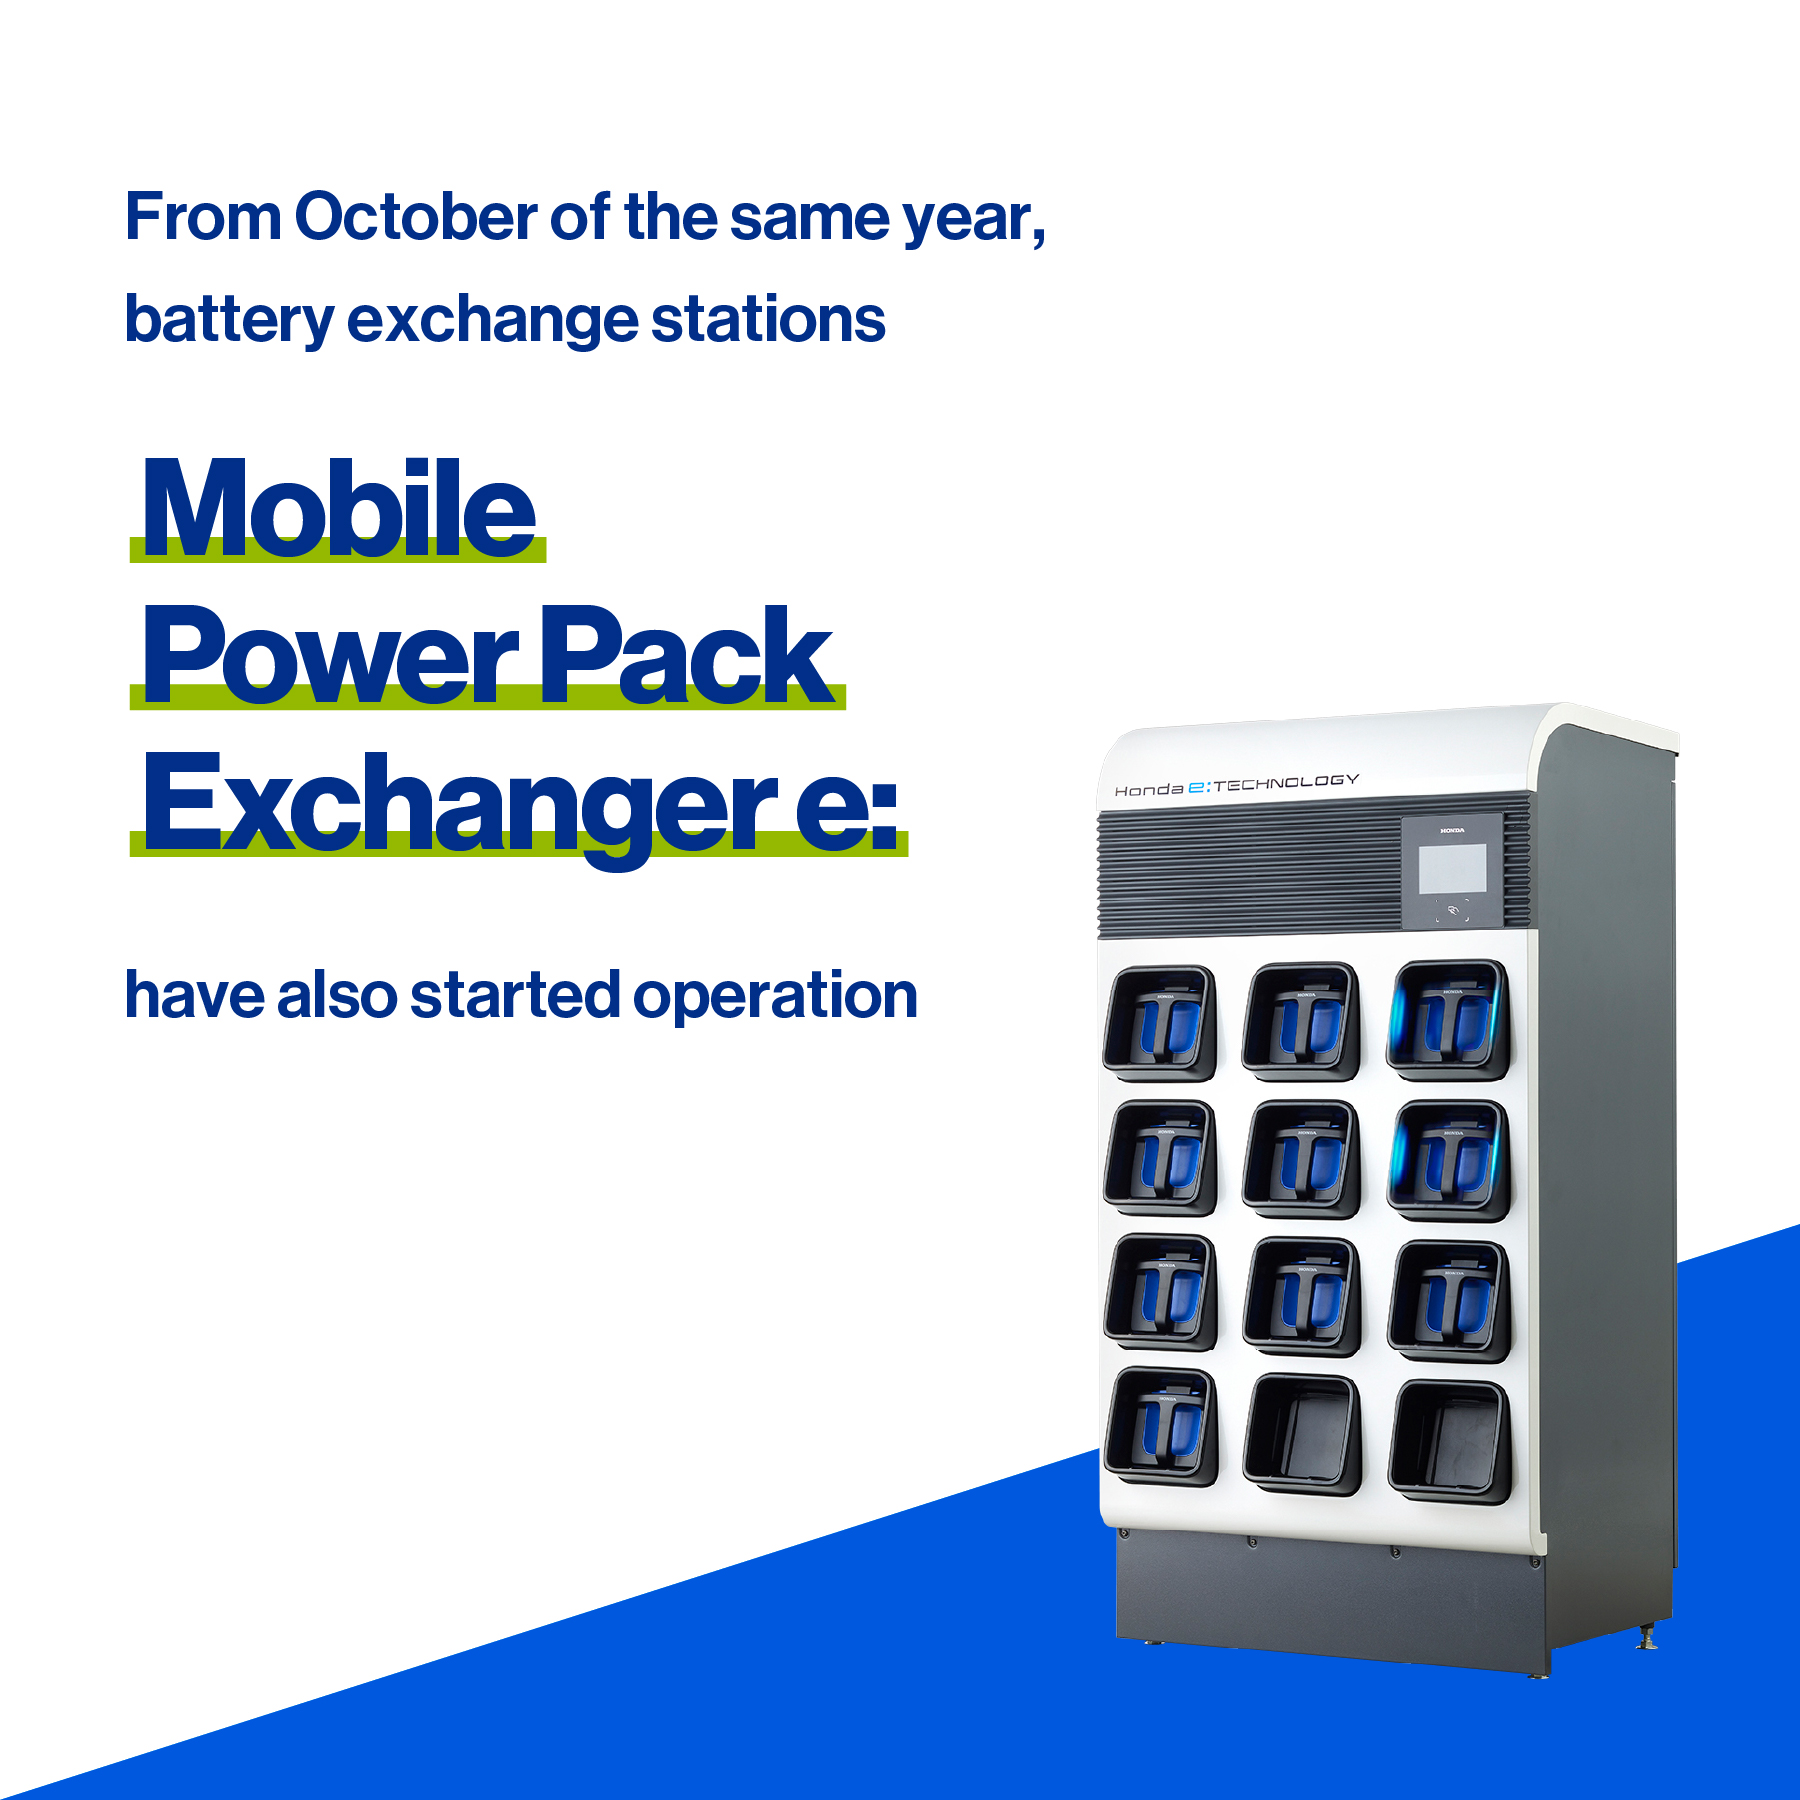 The Mobile Power Pack Exchanger e: started operating